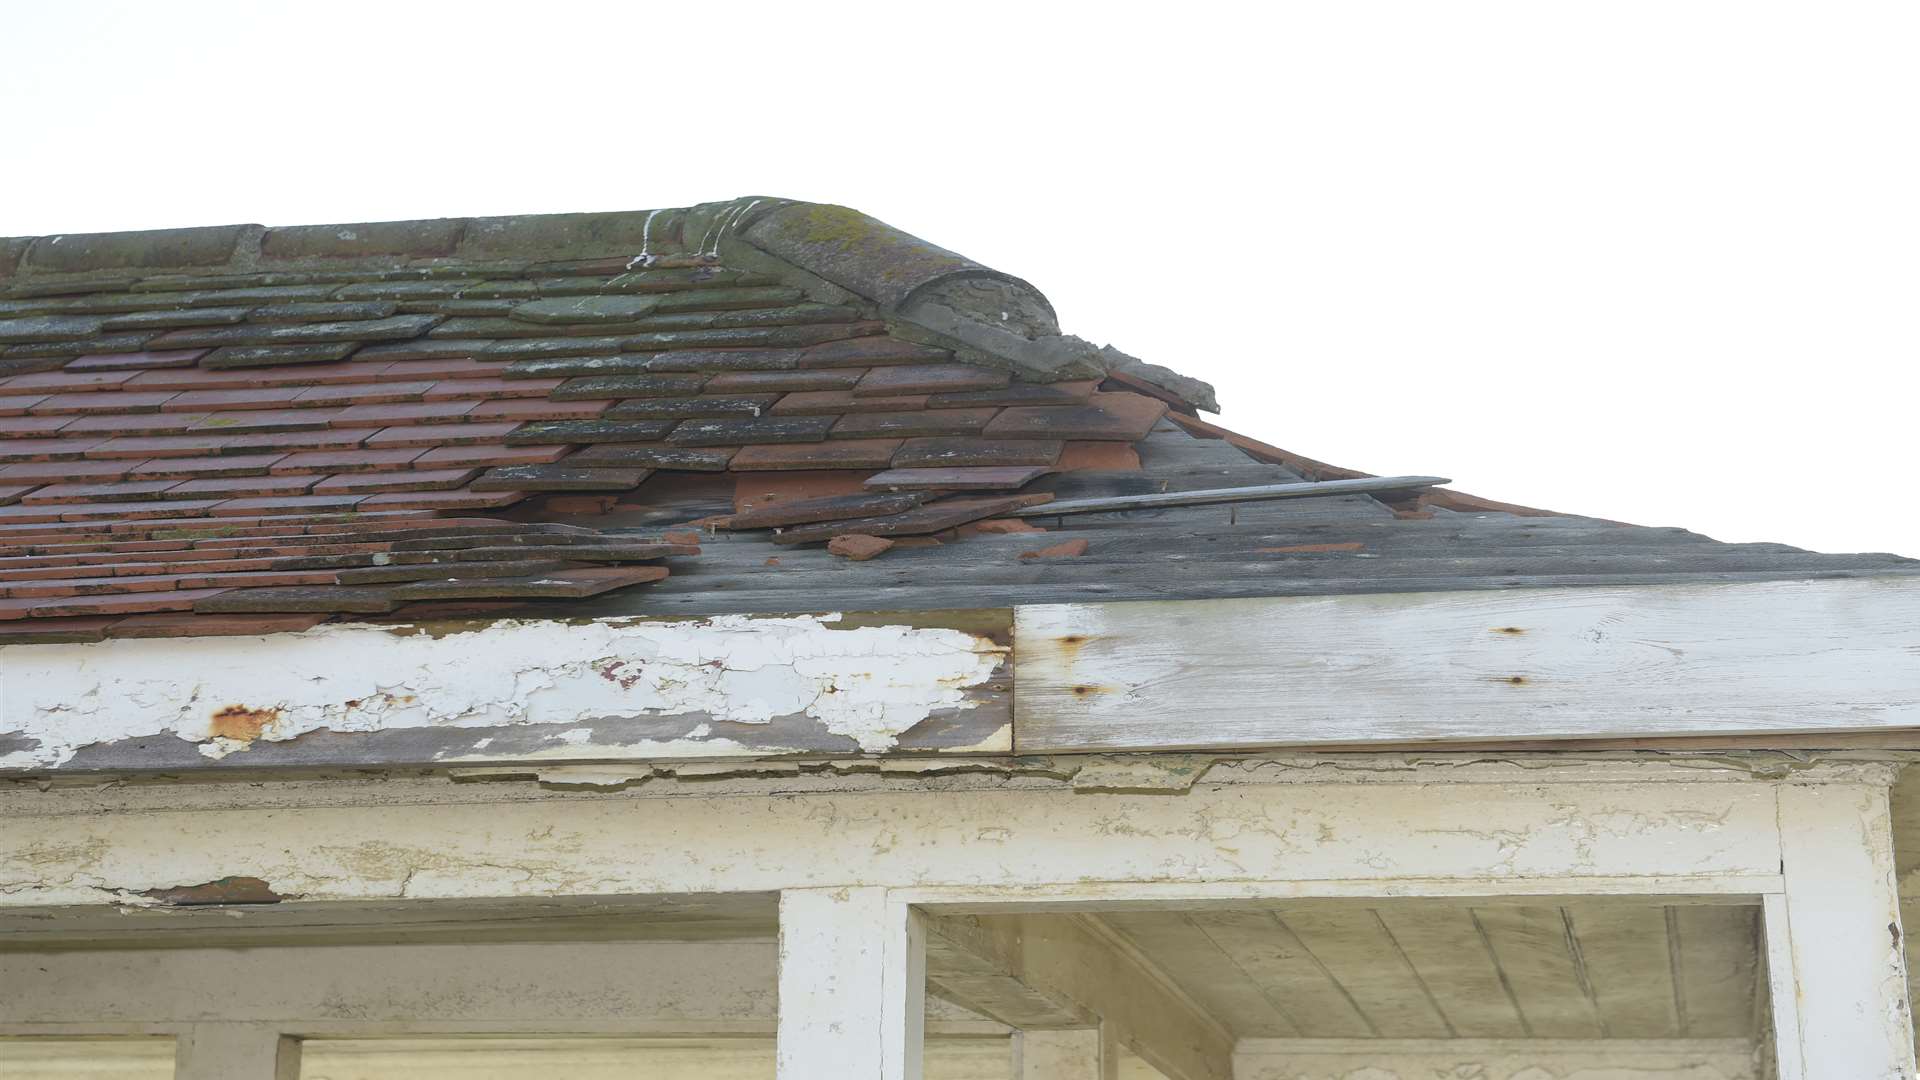 A close-up of damage to one of the shelters